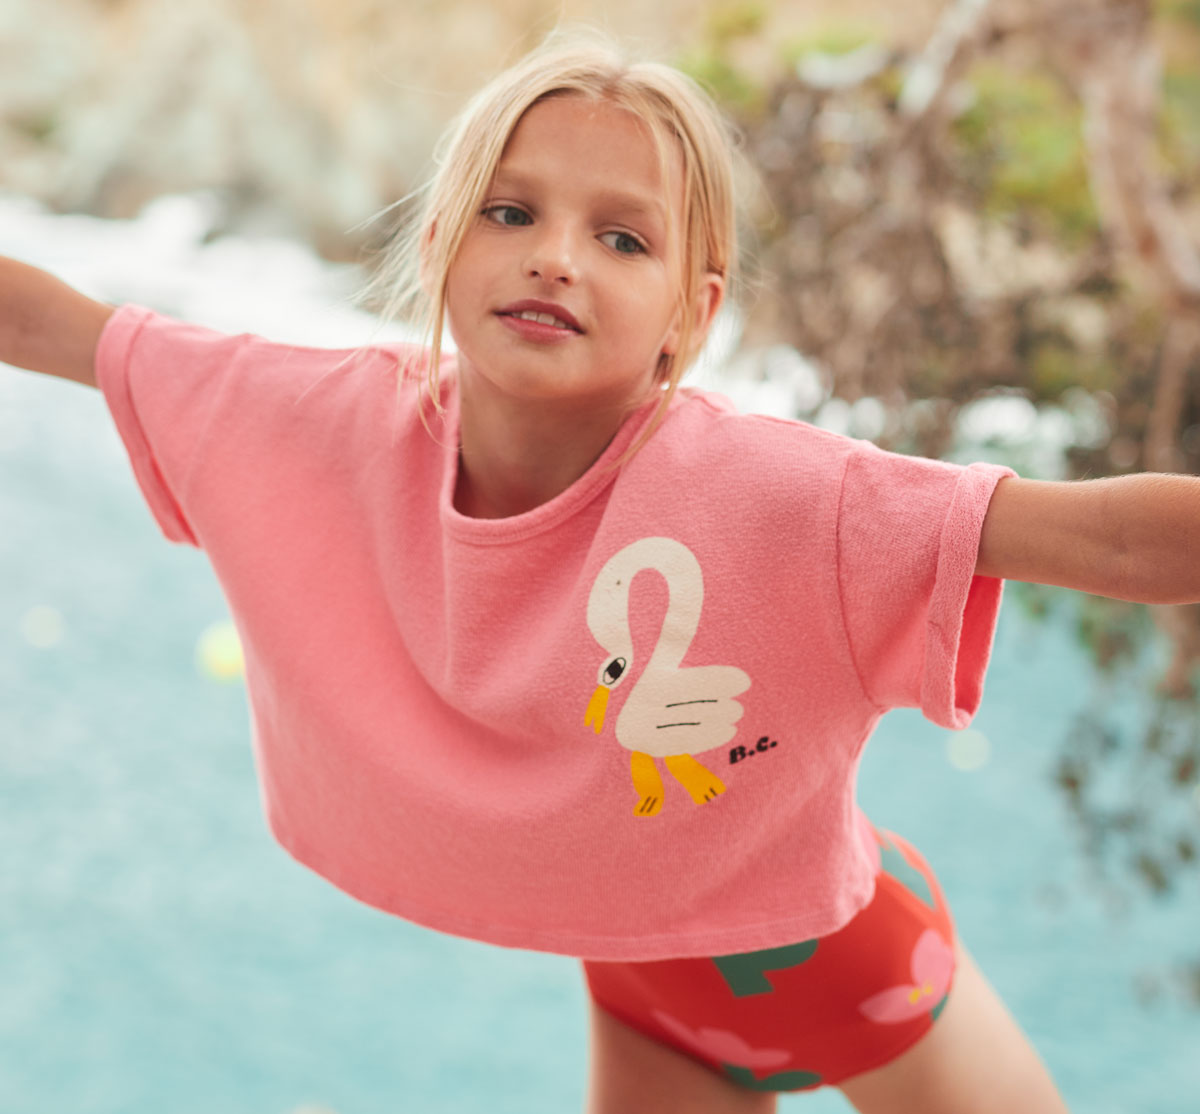 Collection Bobo Choses Sping summer 2023